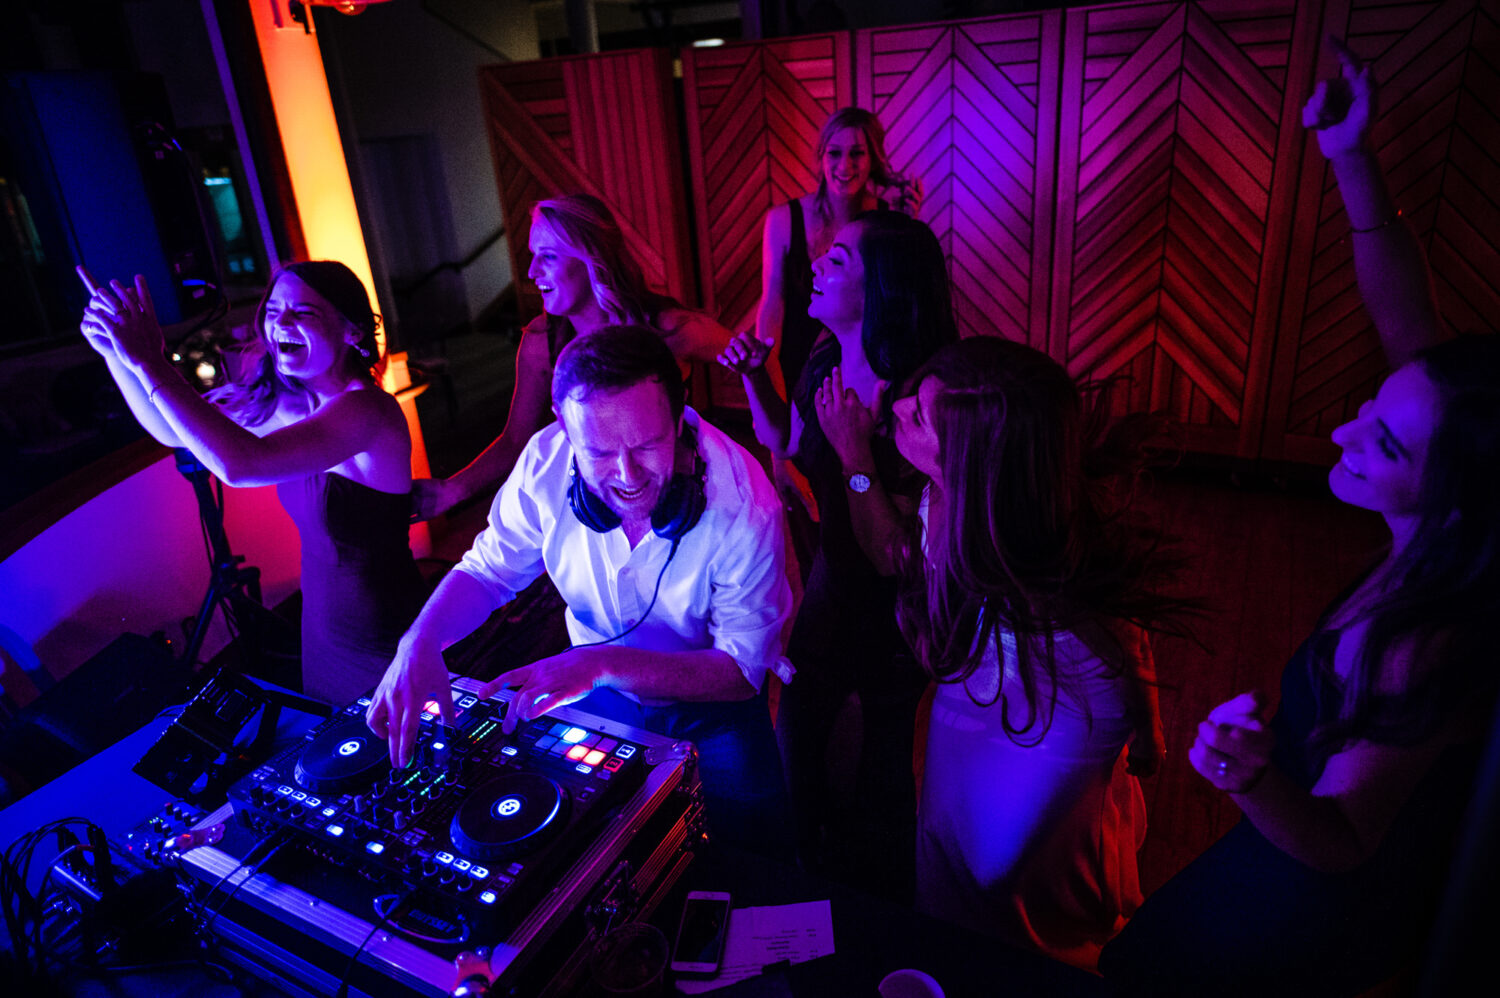 A Lake Tahoe DJ dances with bridesmaids during a colorful wedding reception.